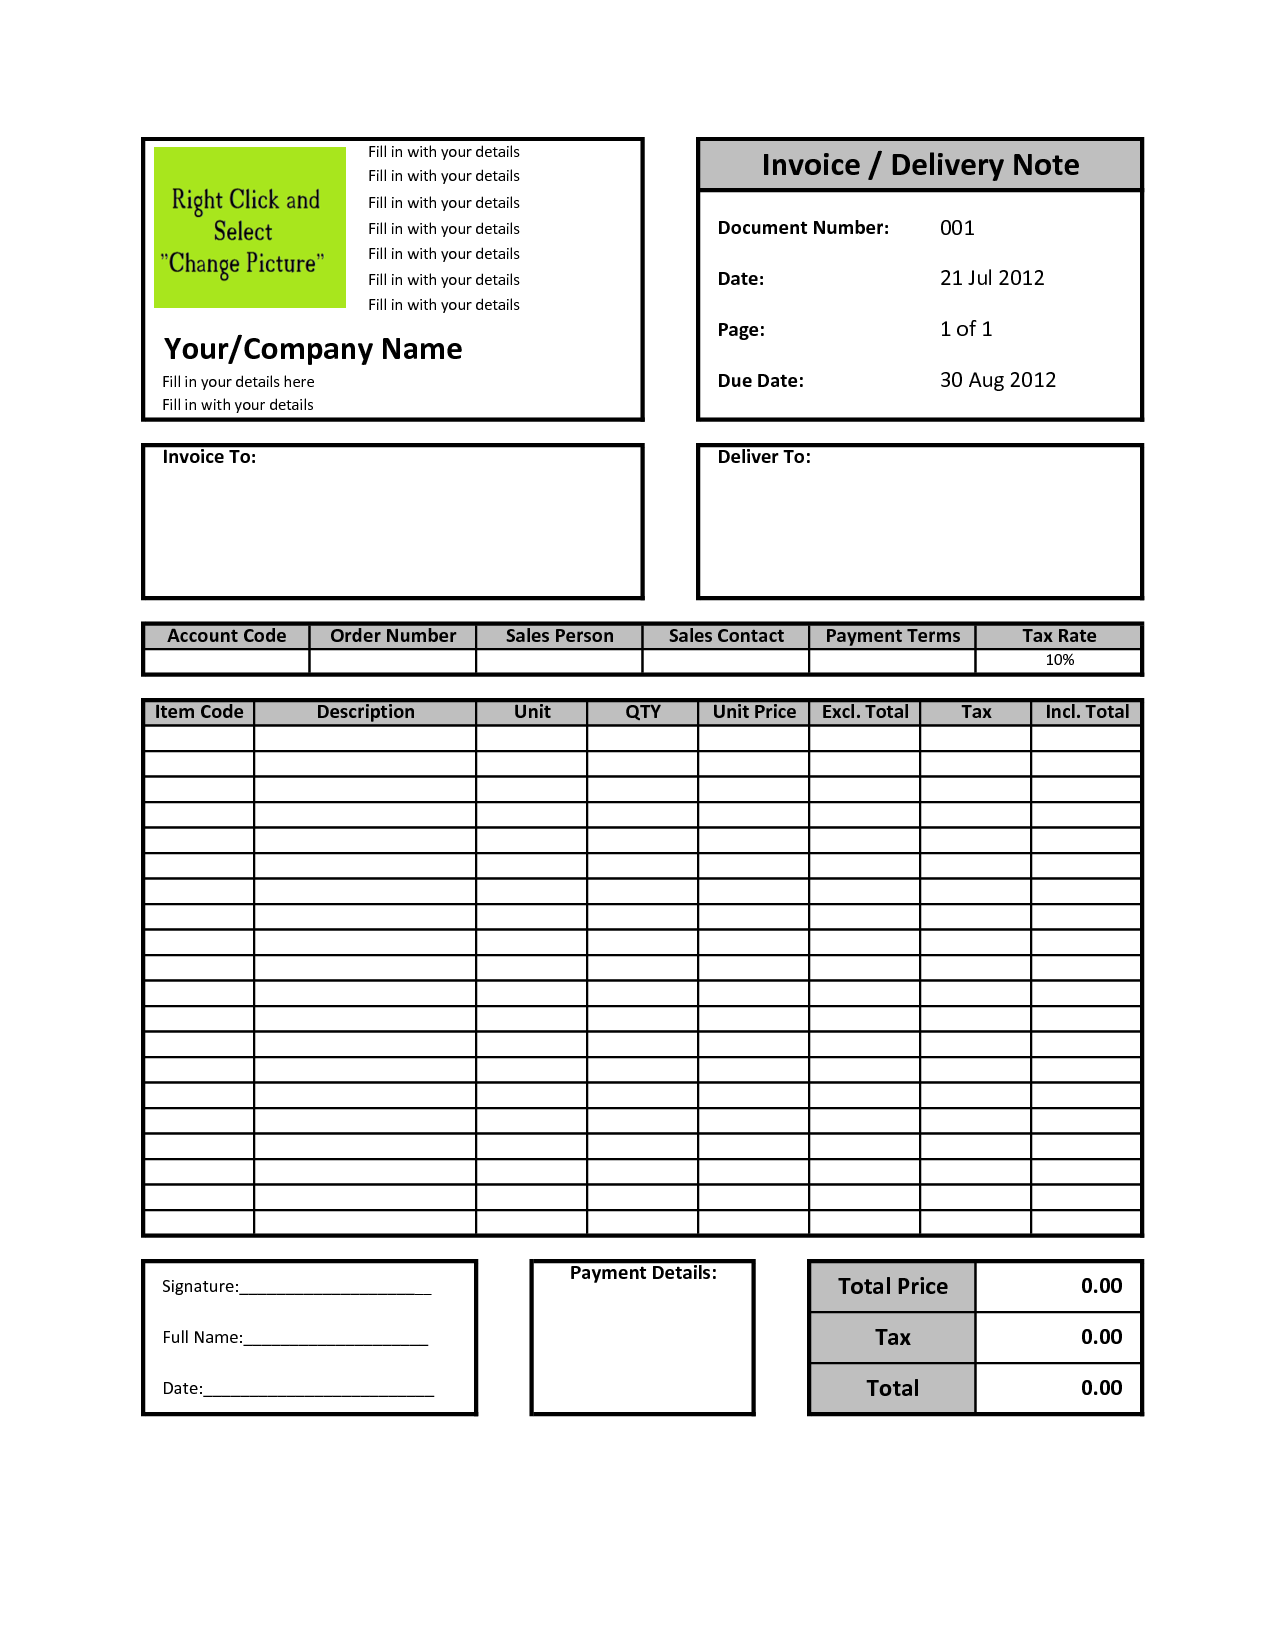 Microsoft Invoice Office Templates Db excel